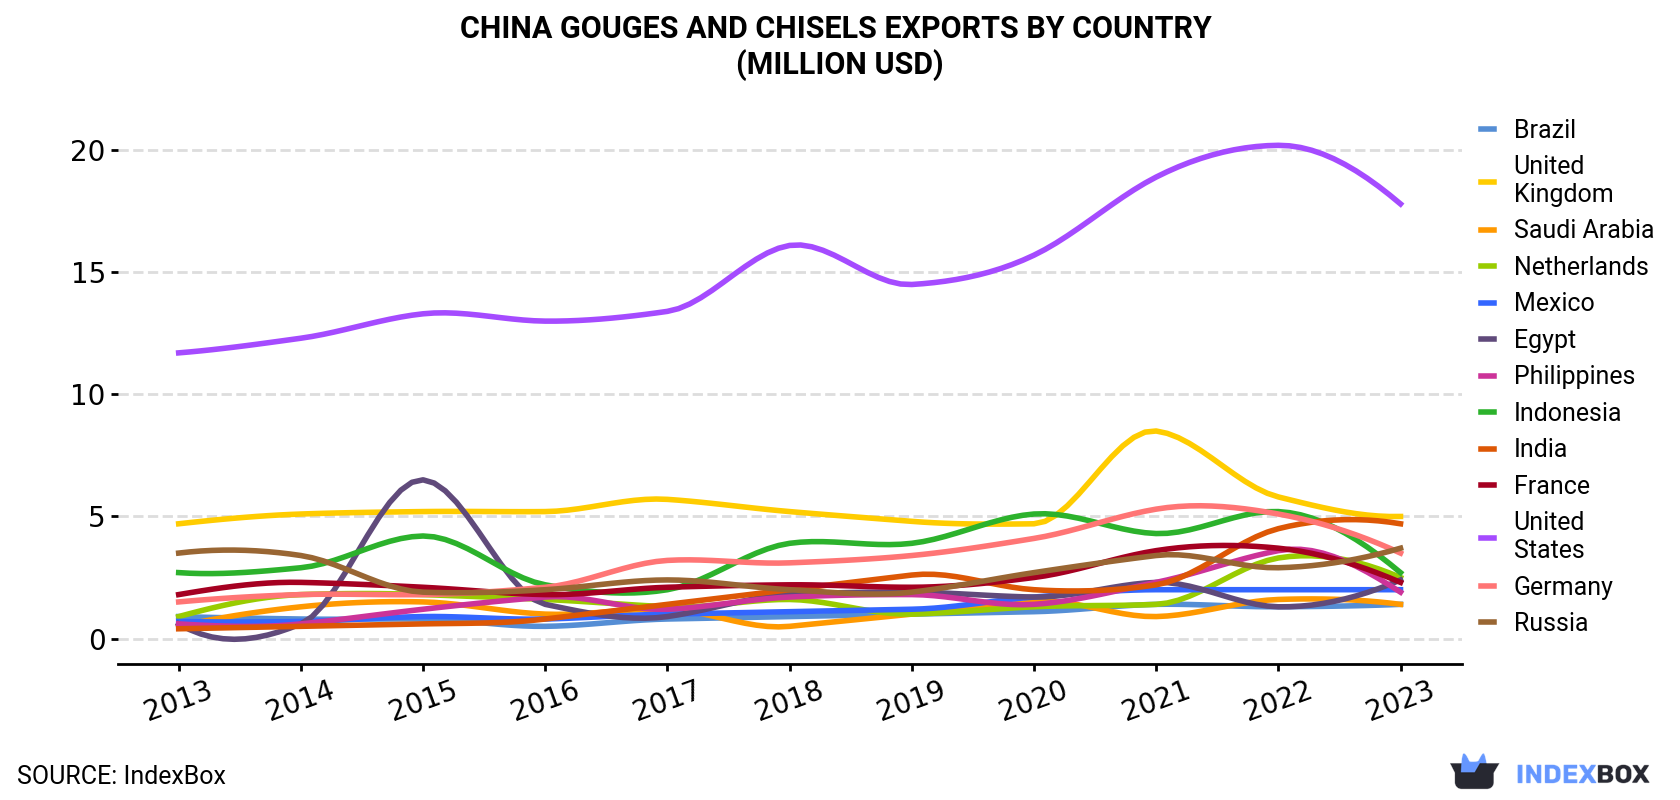 China Gouges And Chisels Exports By Country (Million USD)